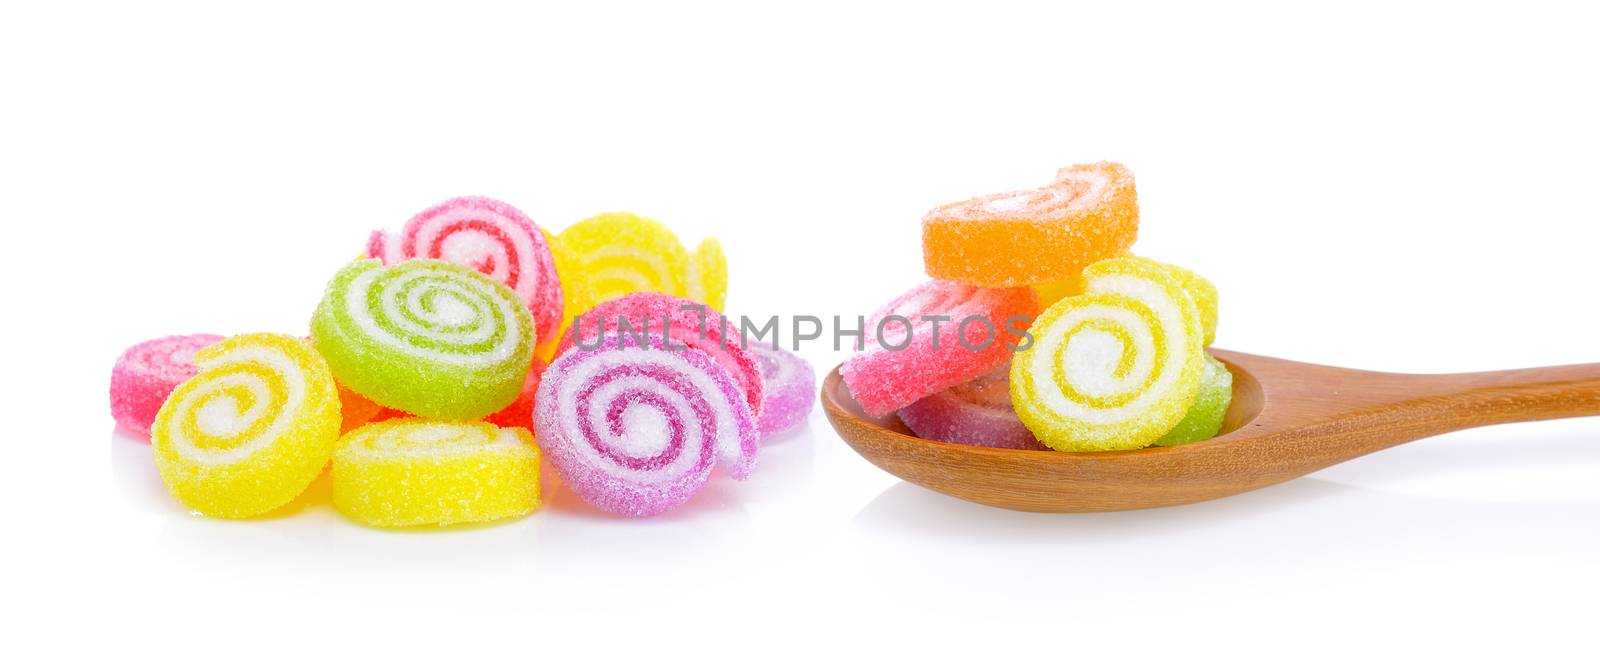 Jelly sweet, flavor fruit, candy dessert colorful on sugar. by sommai